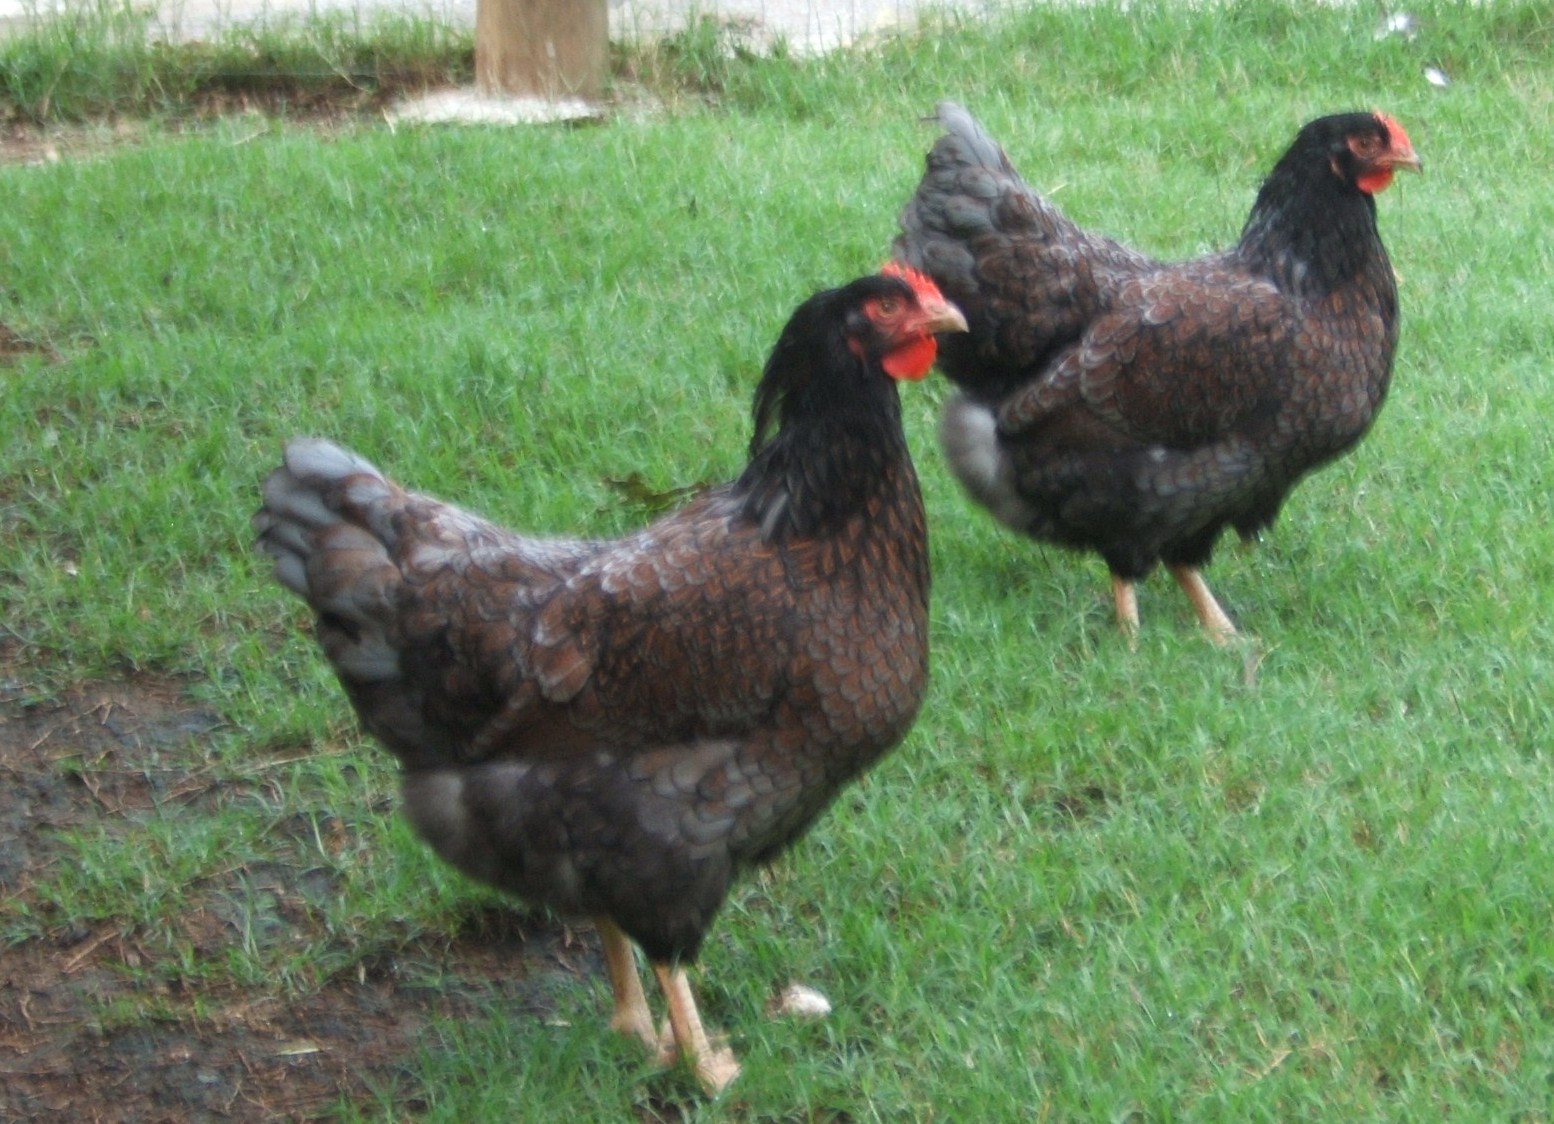 Two Blue Double laced Barnevelder hens